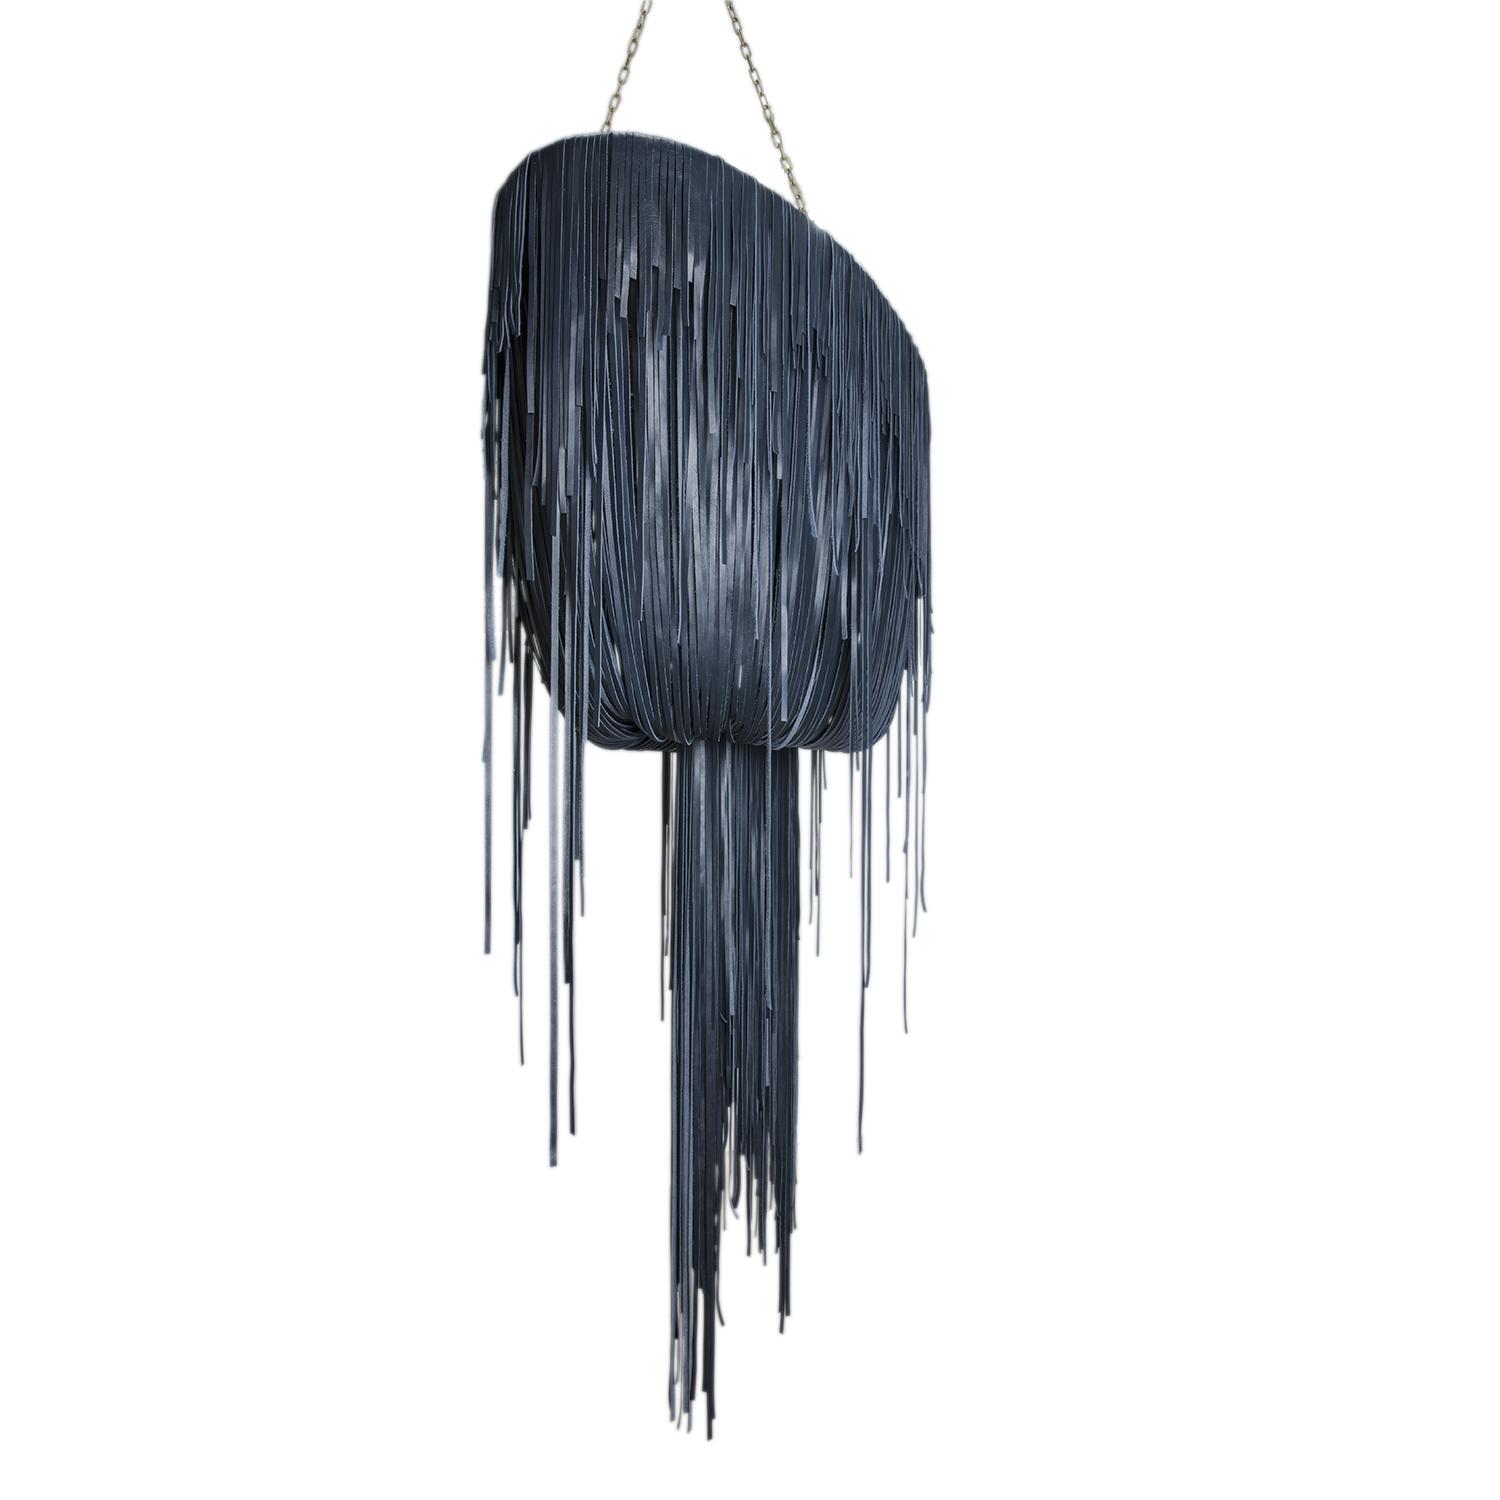 Large Oval Urchin Leather Chandelier in NeKeia Leather